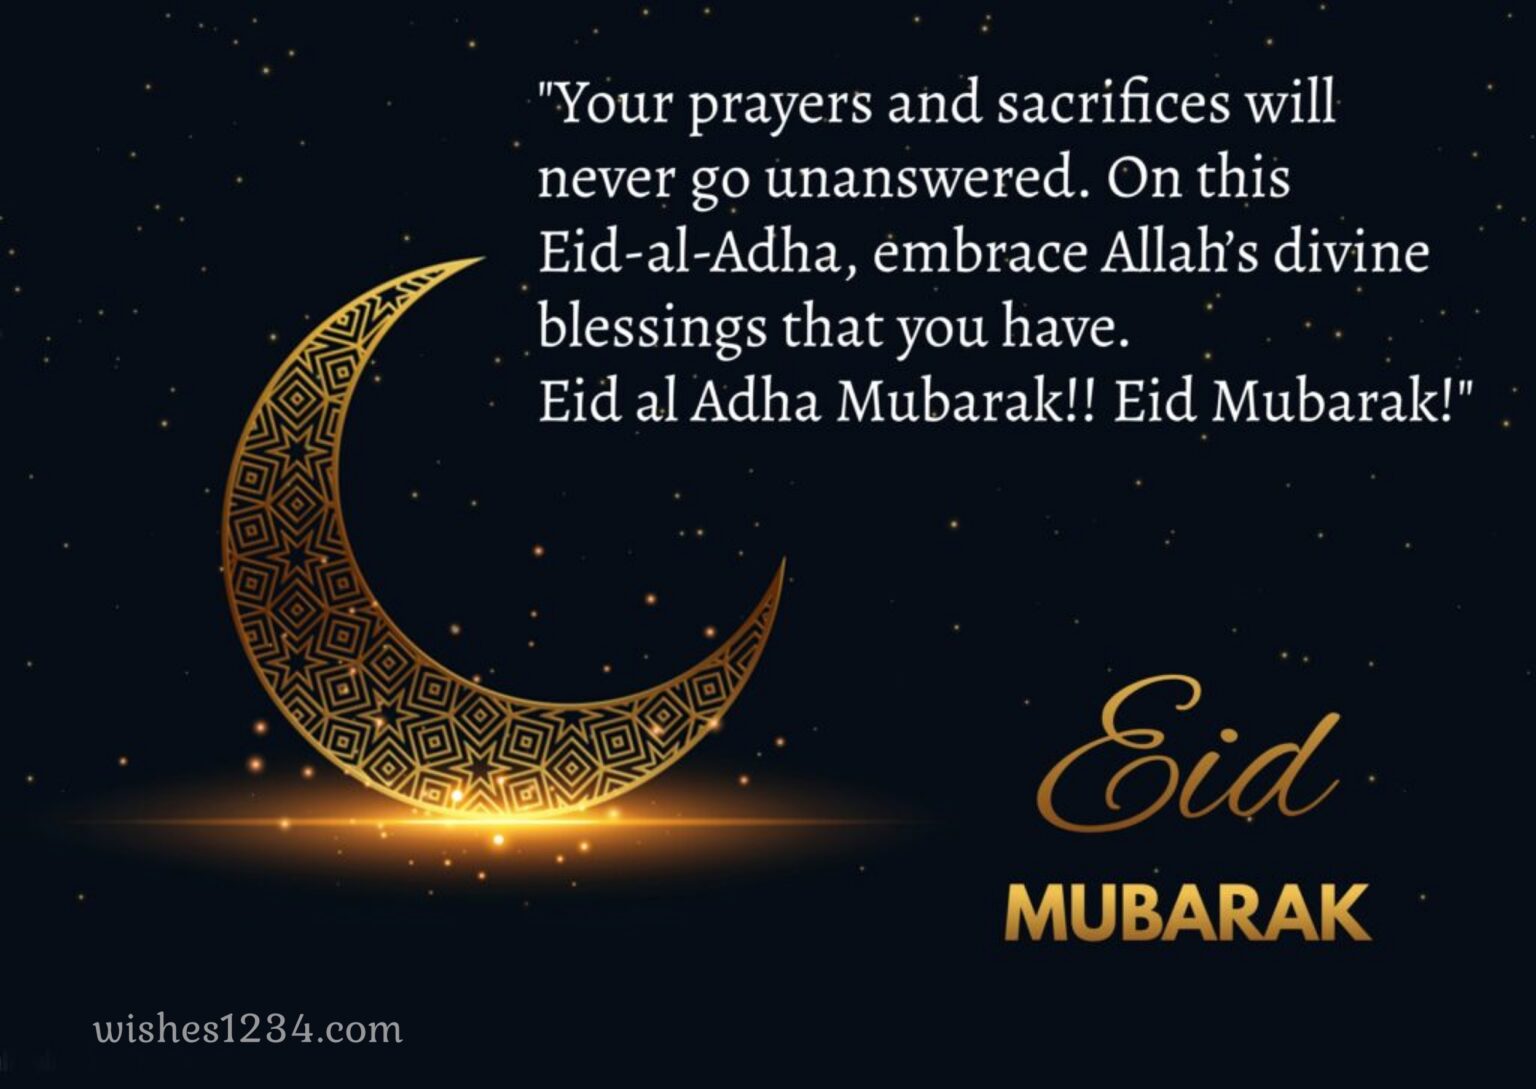 Happy Eid Al Adha Bakrid wishes images to share with loved ones this Bakrid